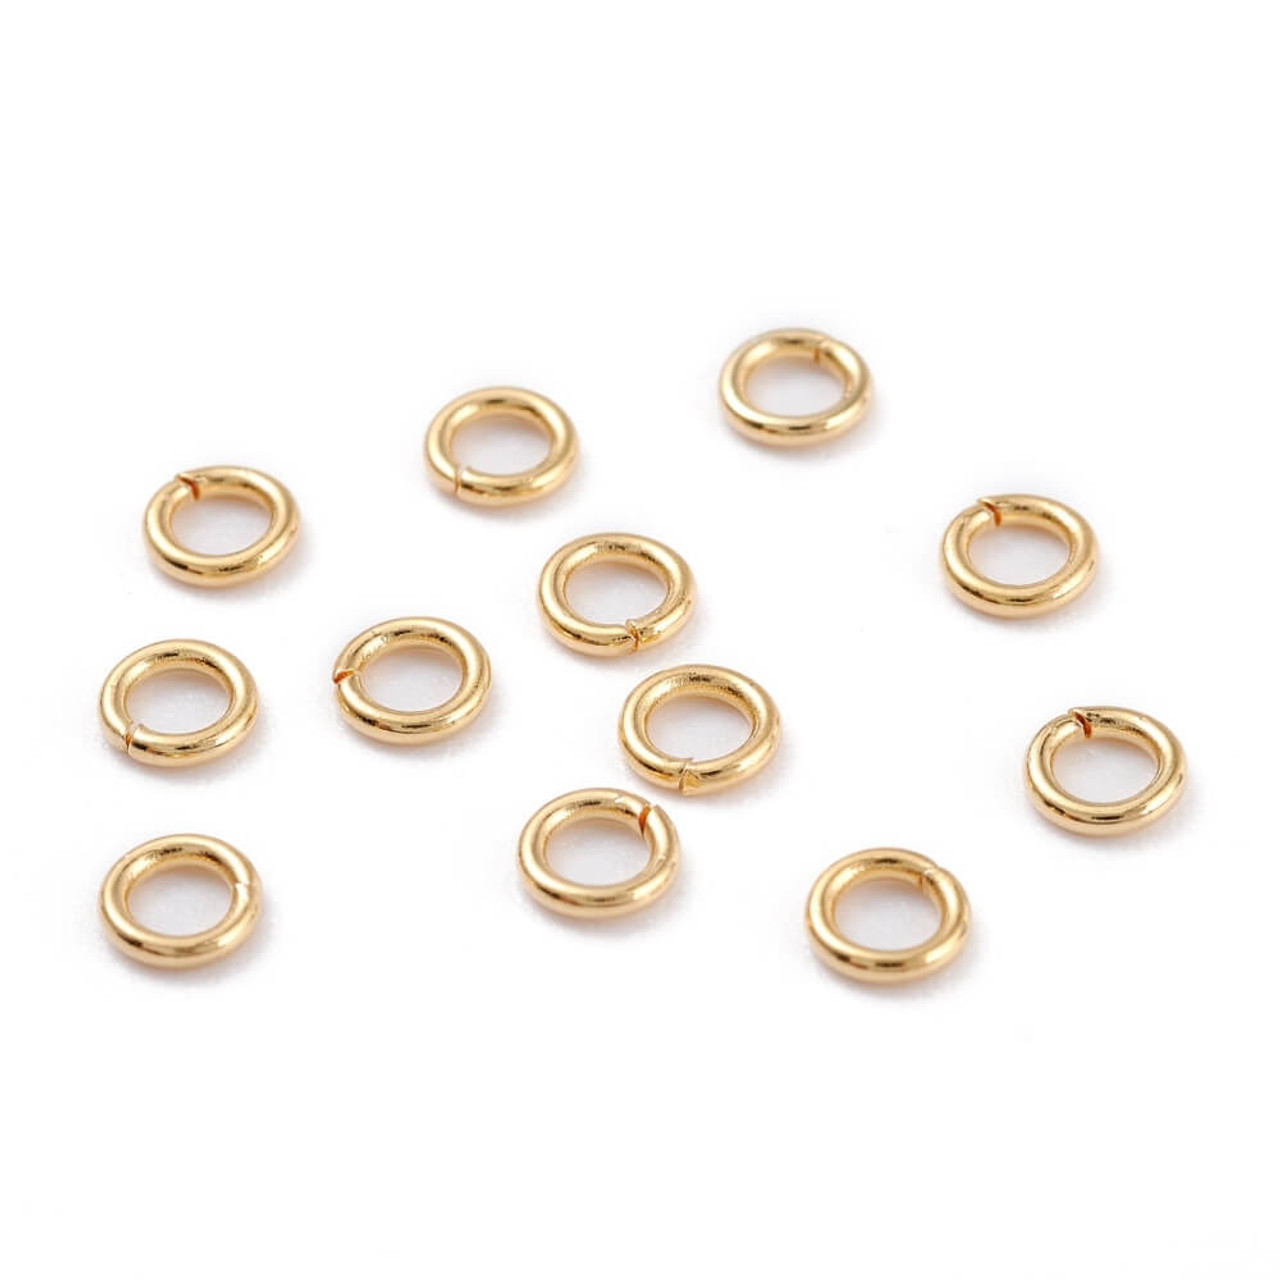 Jump Rings 4mm 22 Gauge LIGHT GOLD PLATED (Pack of 20)